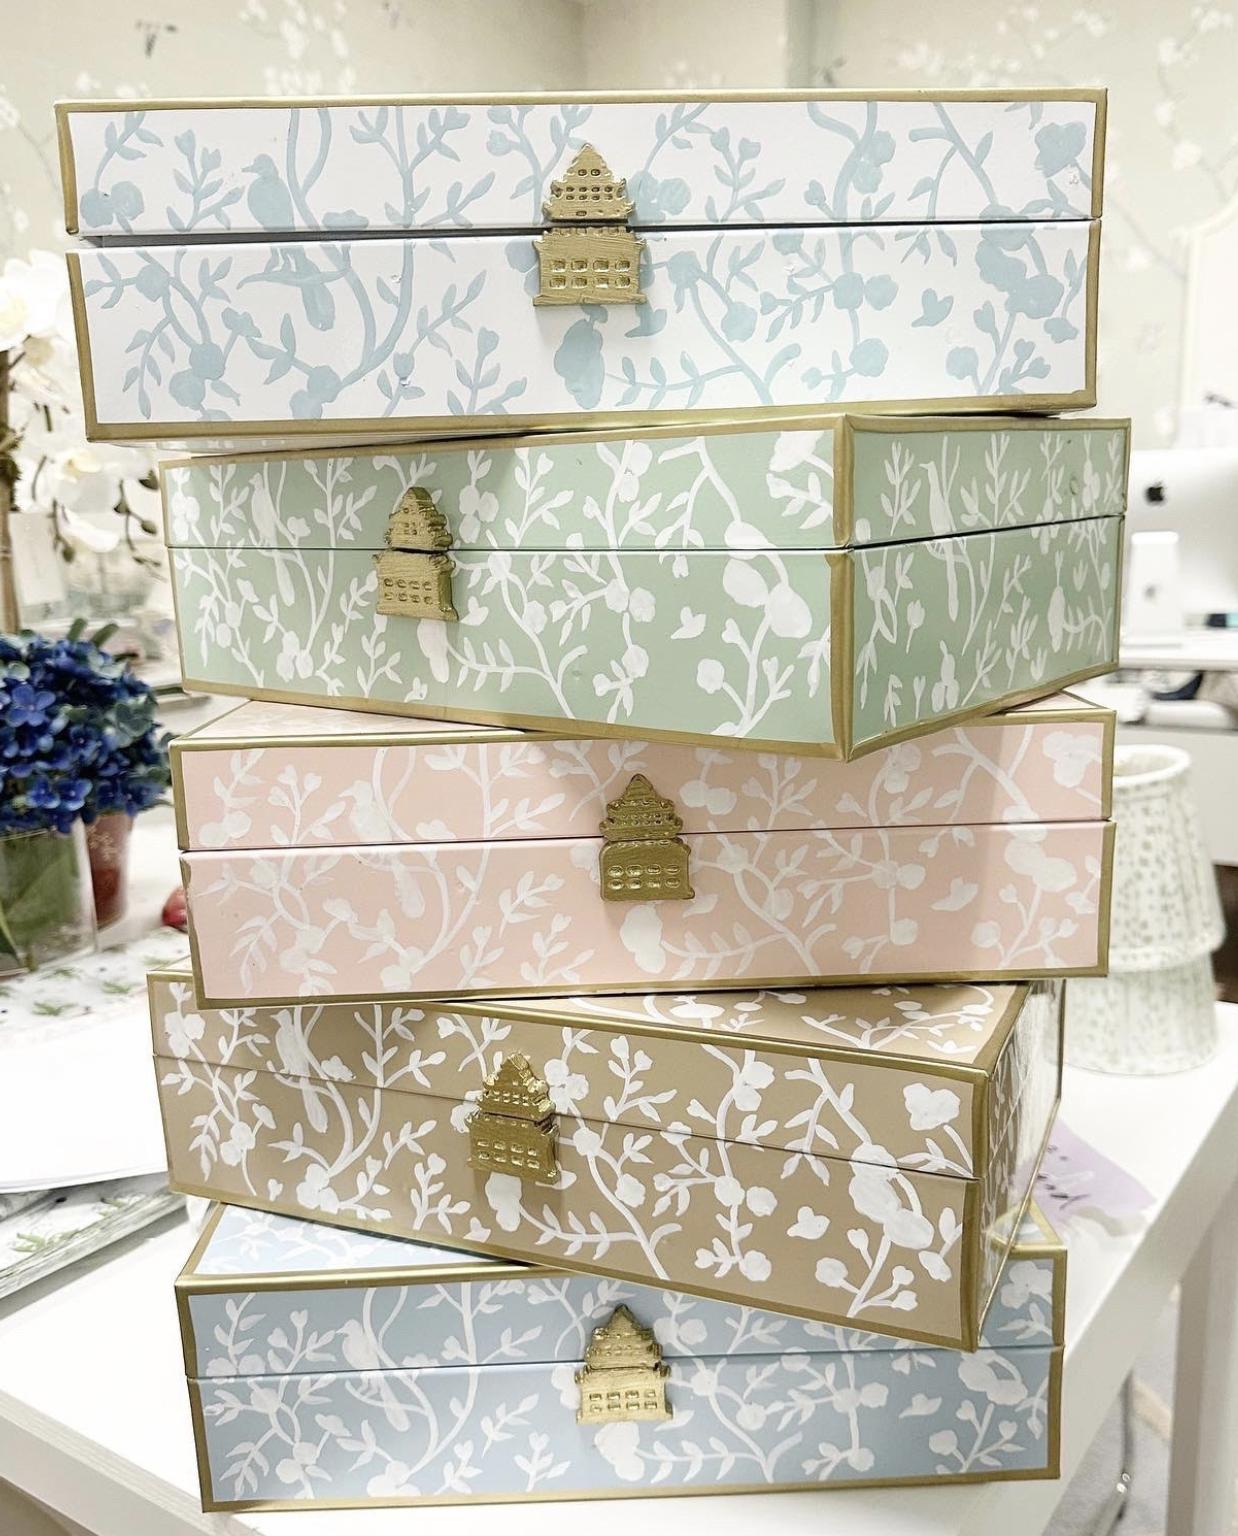 Our beautiful chinoiserie boxes arrival sale!